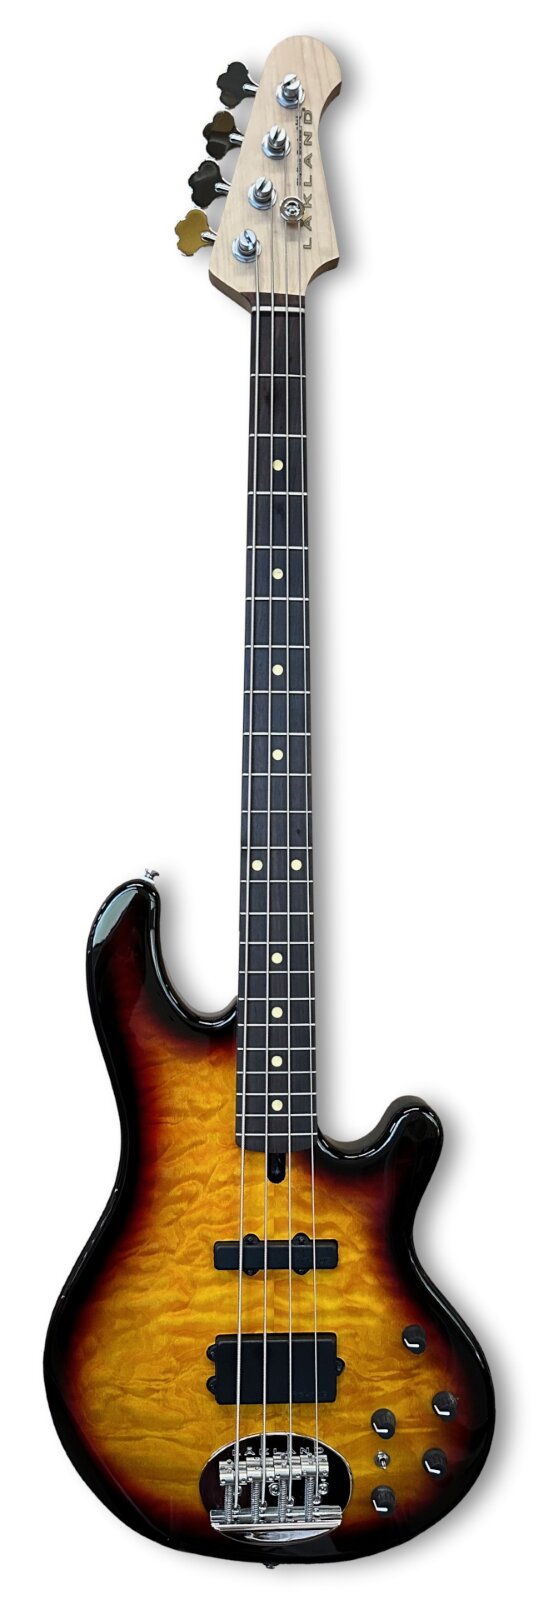 LAKLAND Skyline 44-02 Deluxe Bass, 4-String - Quilted Maple Top, Three Tone Sunburst Gloss : photo 1